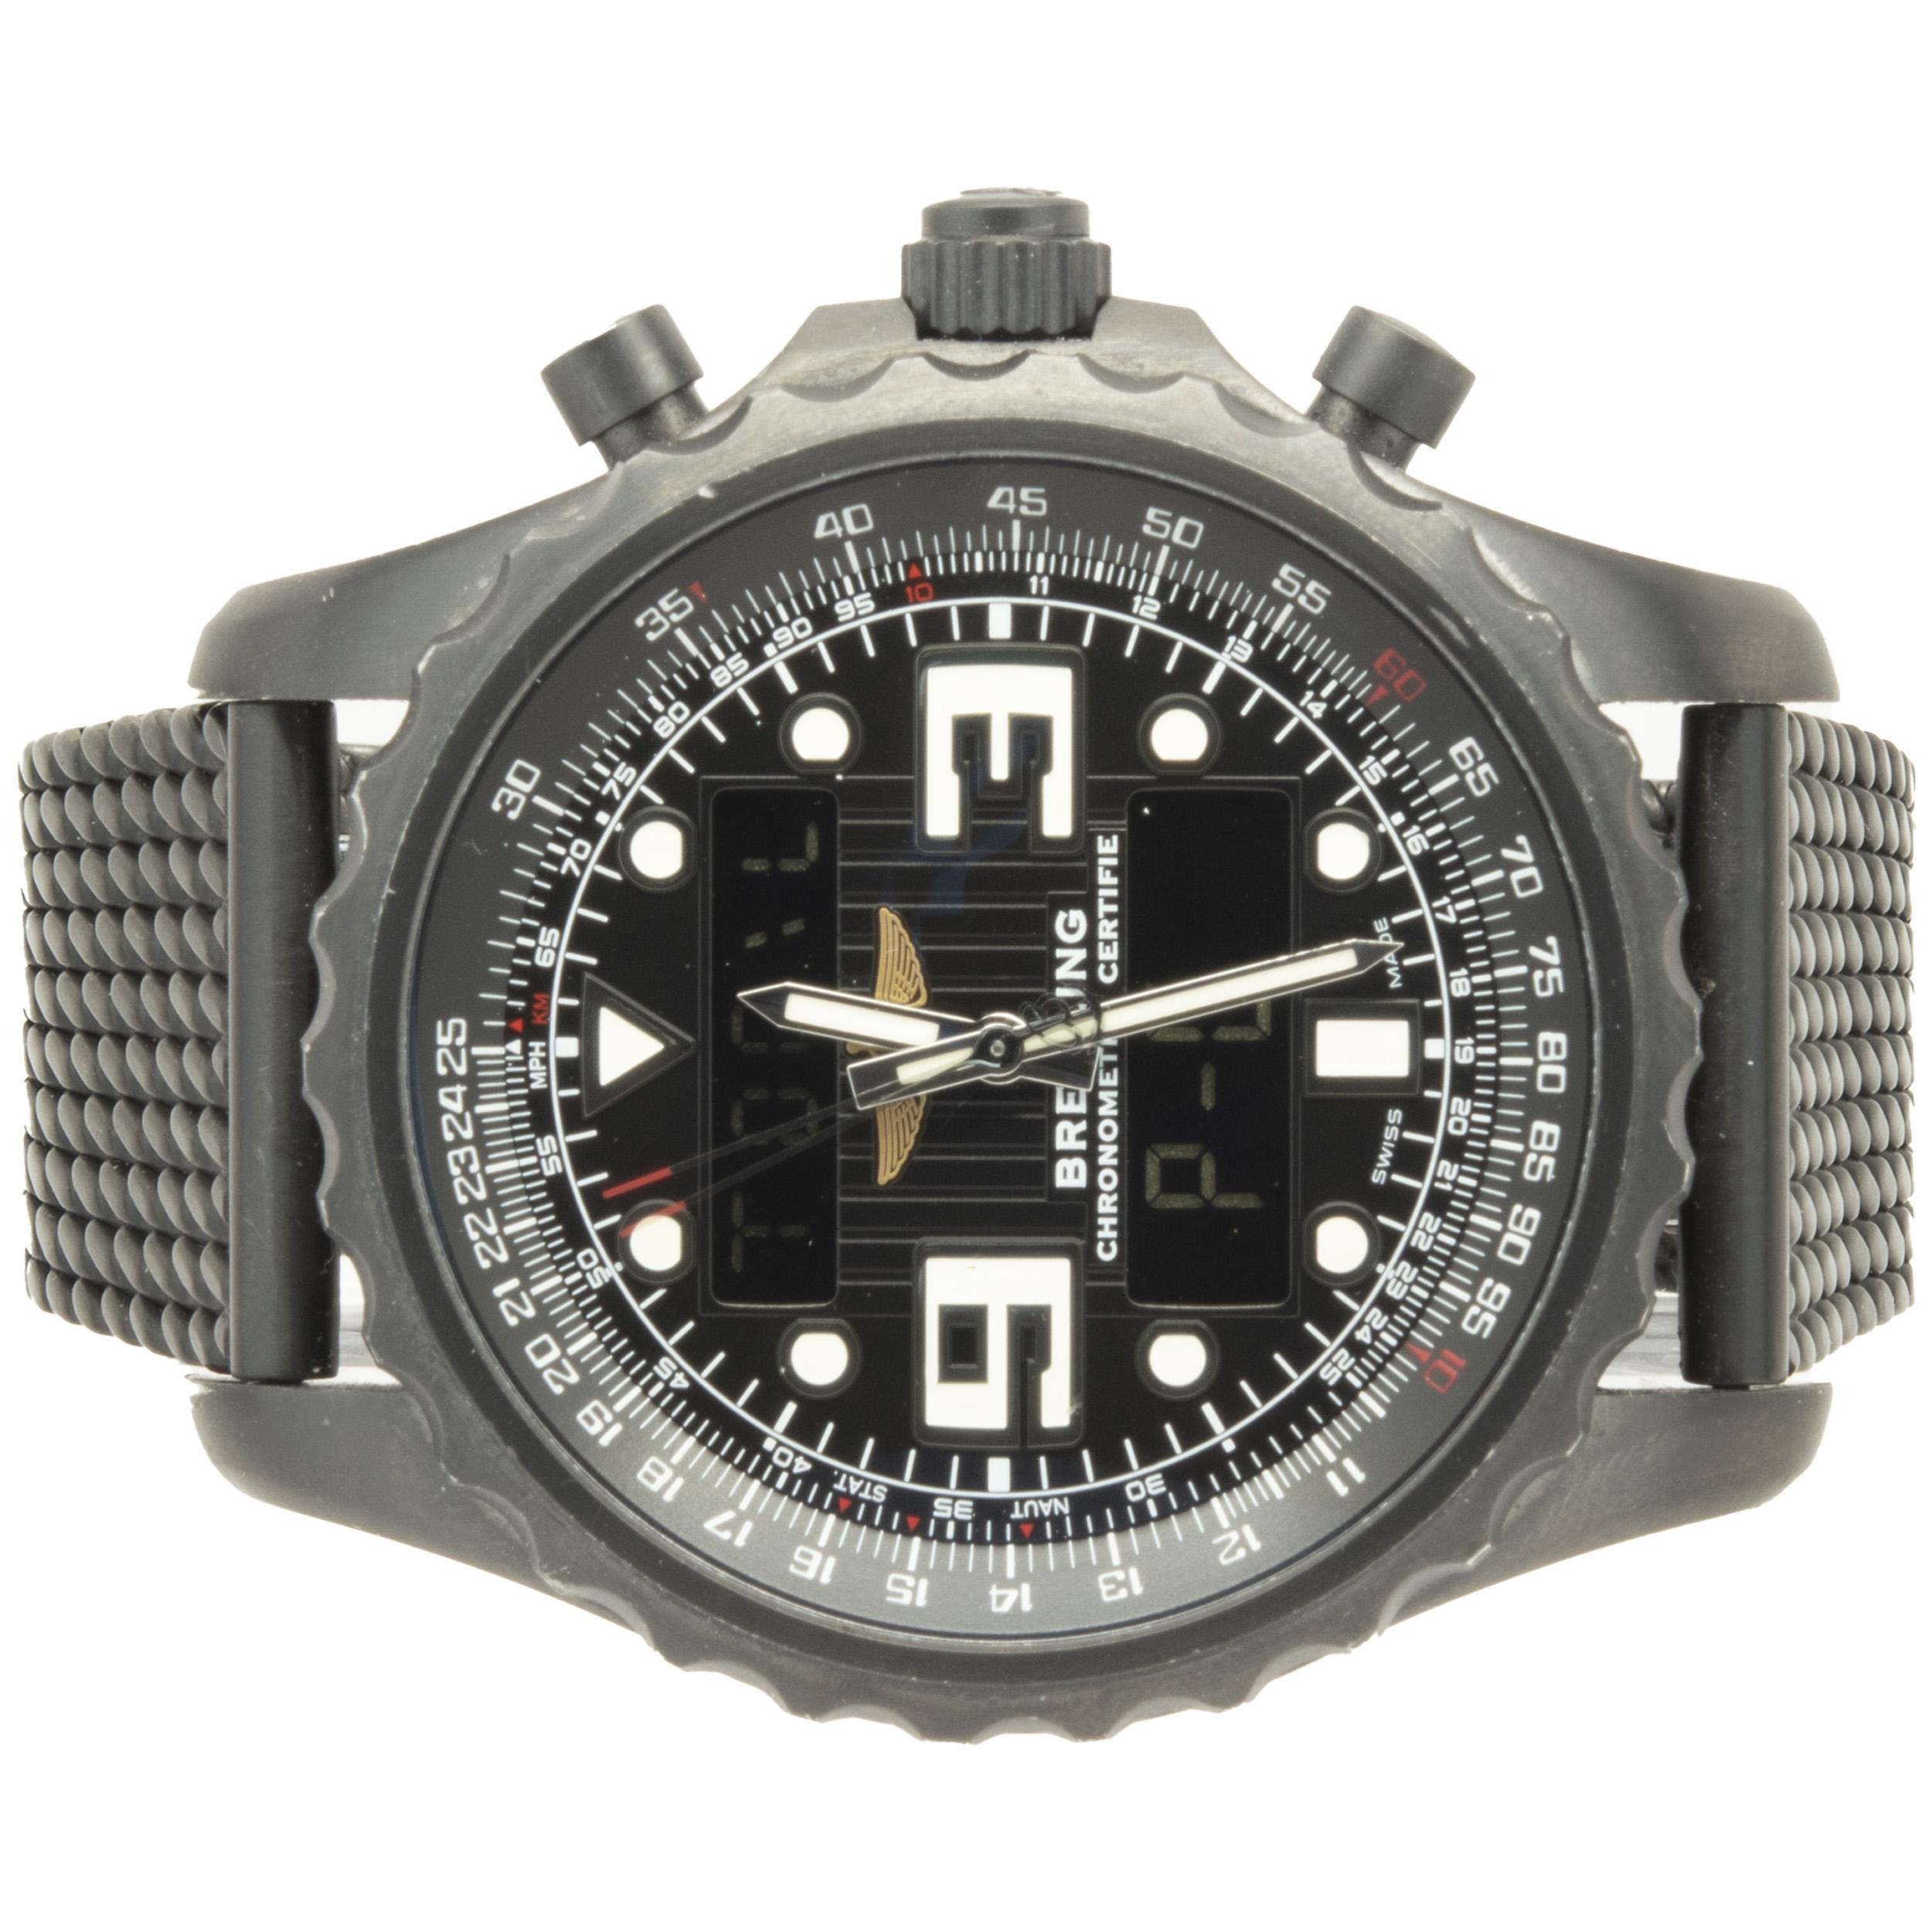 Breitling Black Stainless Steel Chronospace


Designer: Breitling
Movement: automatic / digital
Function: hours, minutes, small seconds, chronograph, digital, alarm
Case: round 48mm stainless steel case, scratch resistant sapphire crystal, water